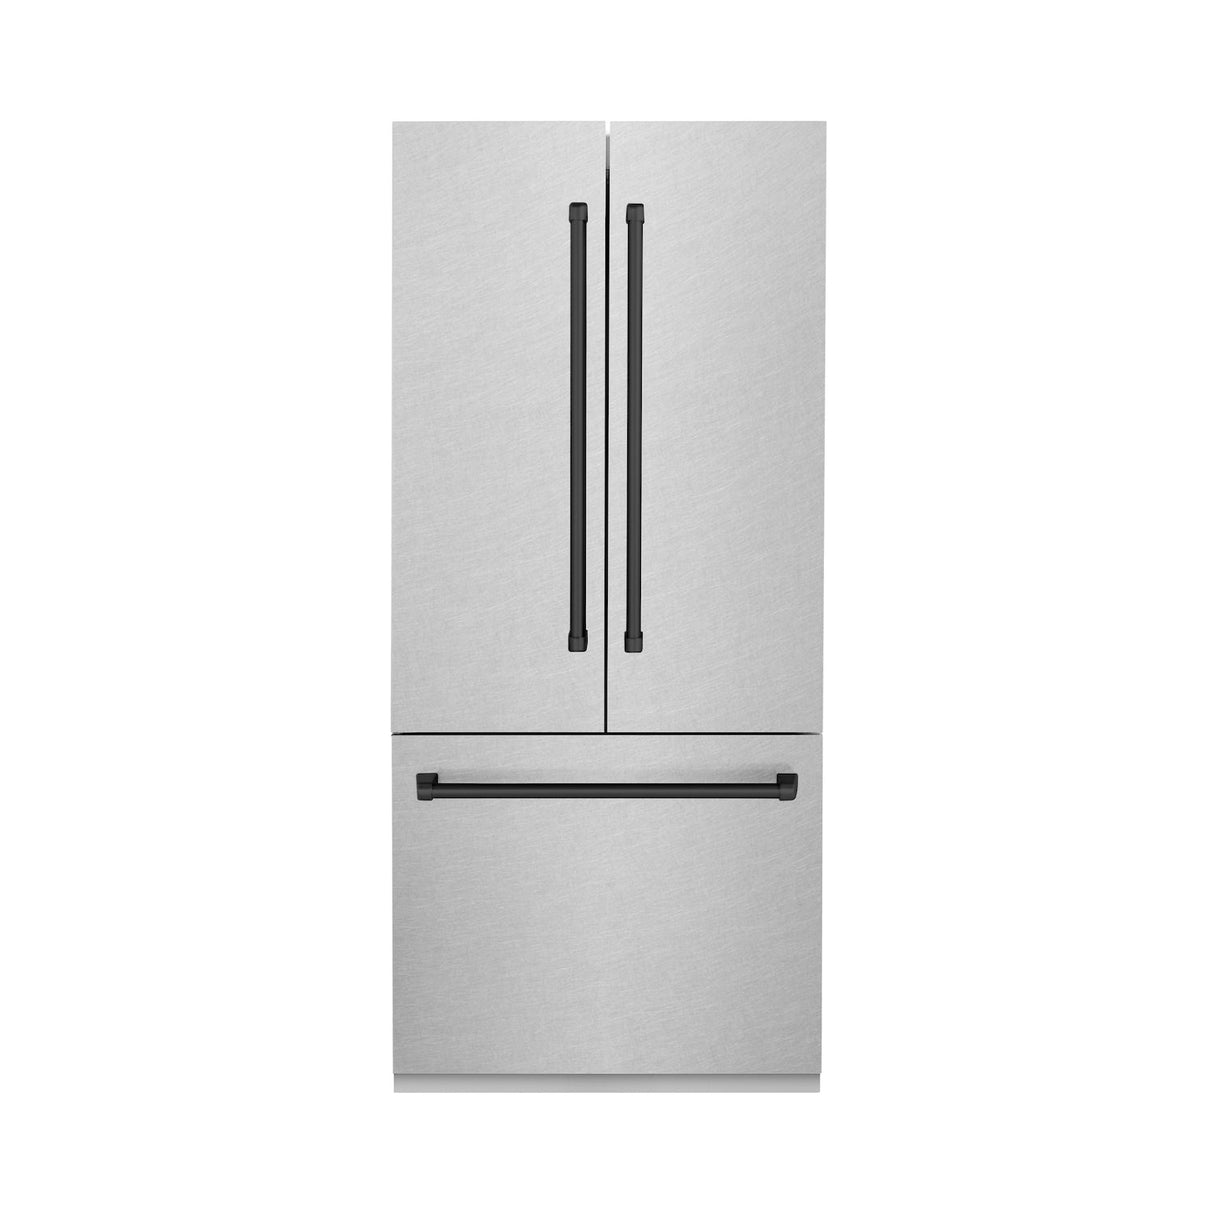 ZLINE Autograph Edition 36 in. 19.6 cu. ft. Built-in 2-Door Bottom Freezer Refrigerator with Internal Water and Ice Dispenser in Fingerprint Resistant Stainless Steel with Matte Black Accents (RBIVZ-SN-36-MB)